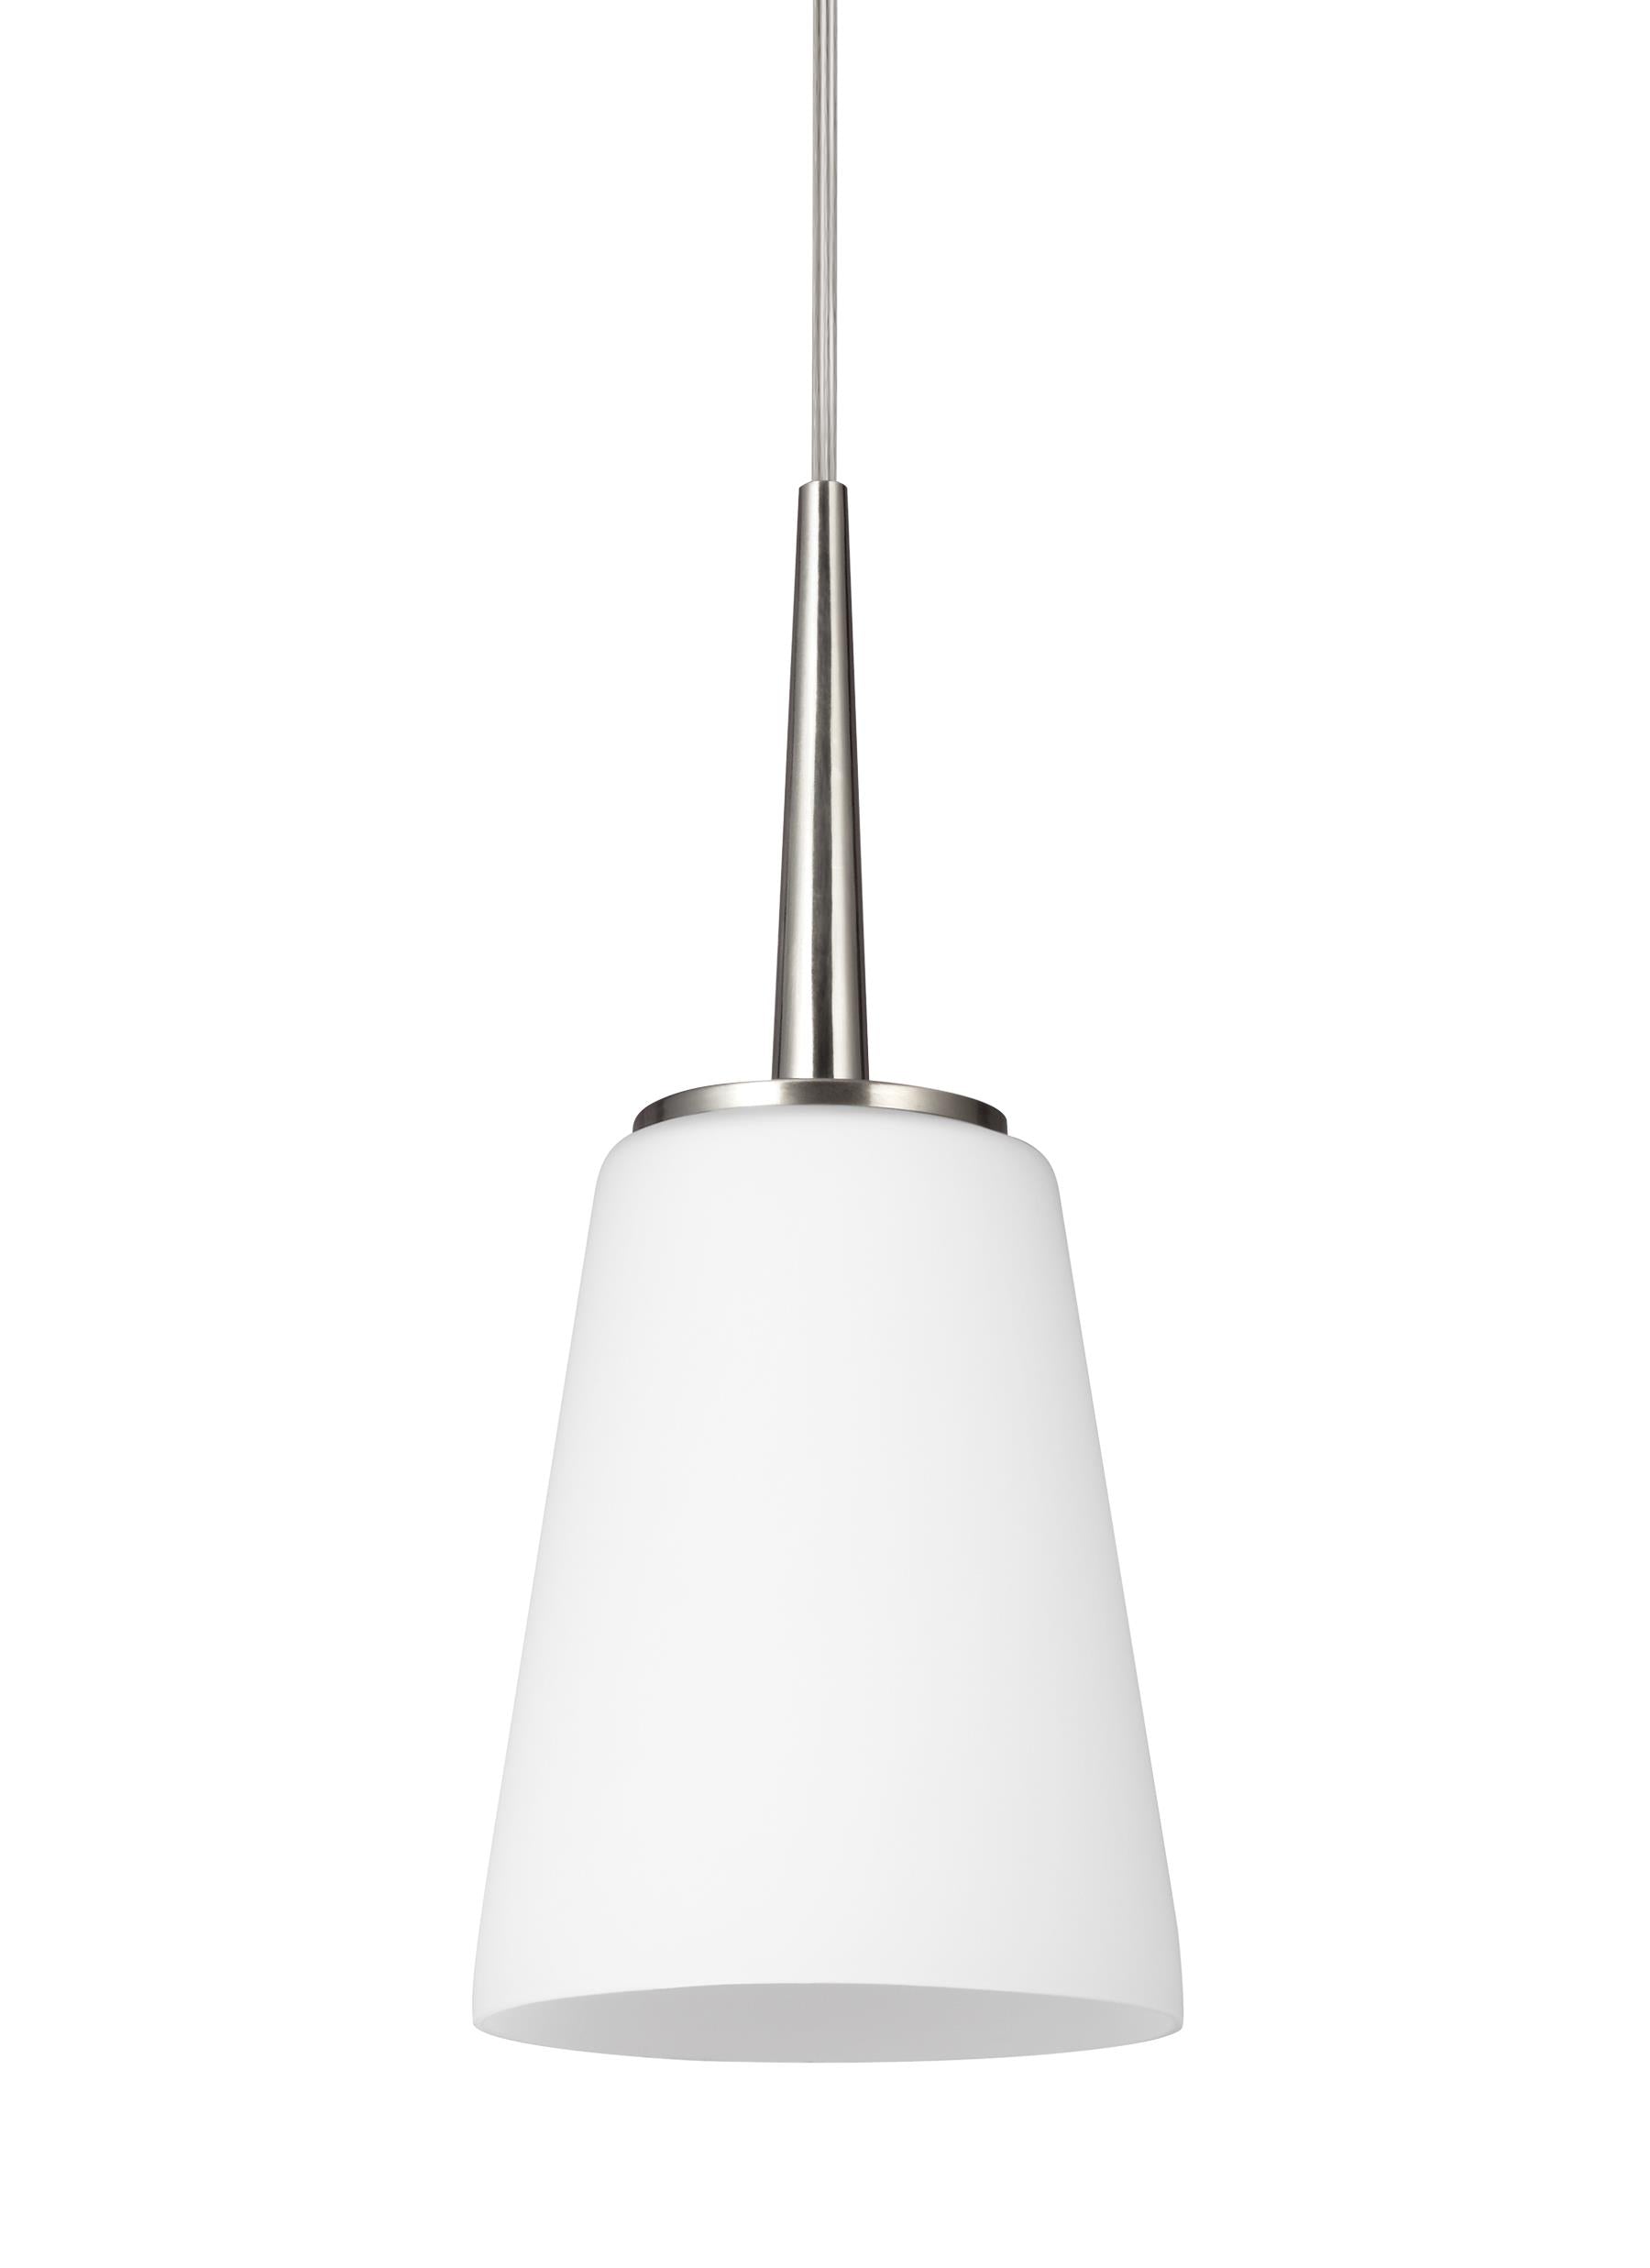 Driscoll contemporary 1-light indoor dimmable ceiling hanging single pendant light in brushed nickel silver finish with ca...